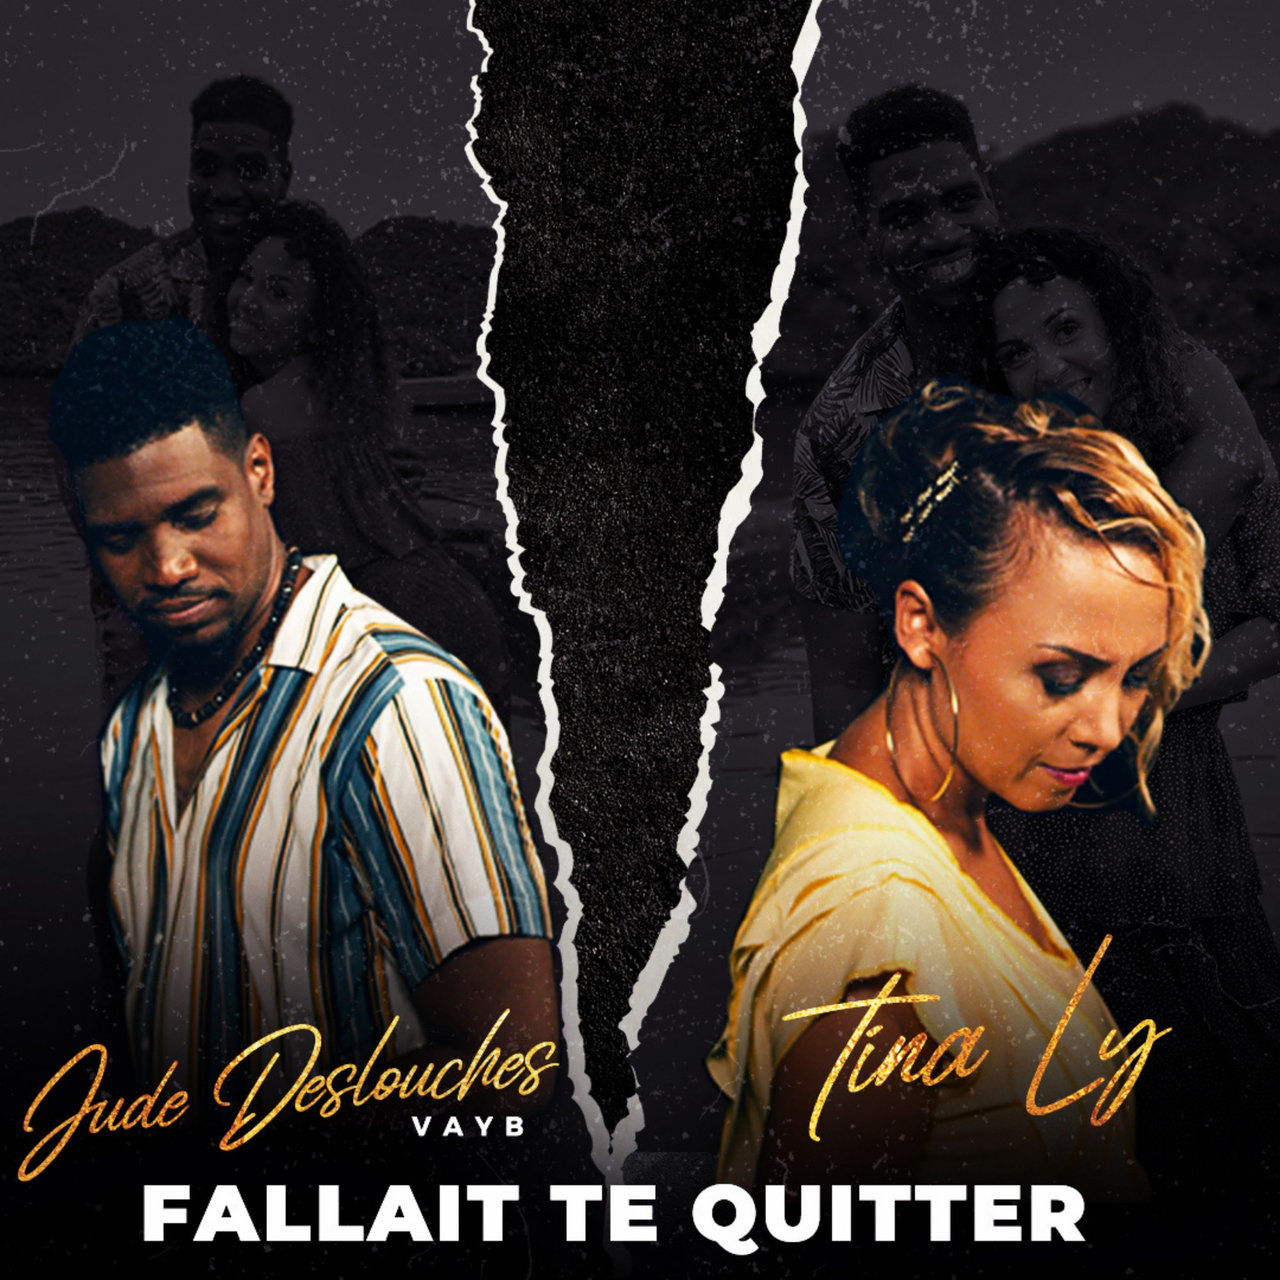 Tina Ly - Fallait Te Quitter (ft. Jude Deslouches) (Cover)